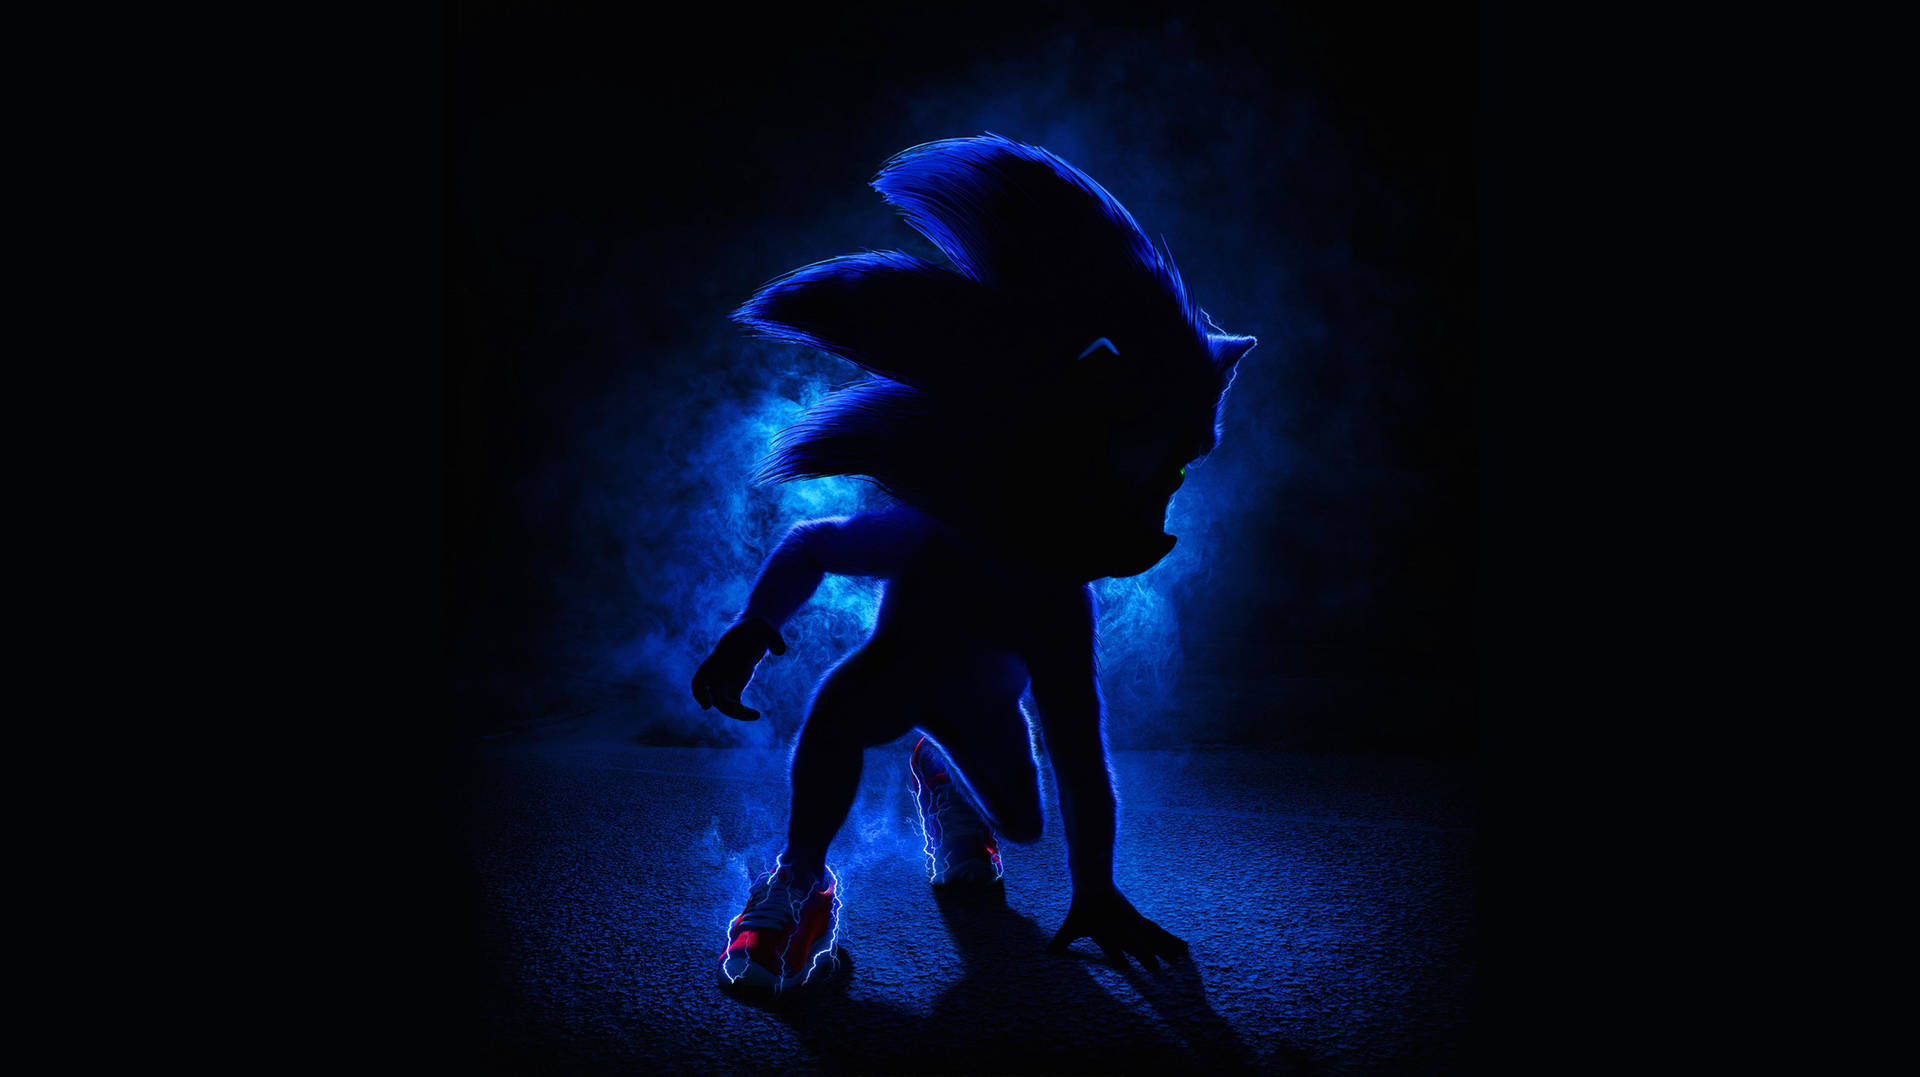 Silhouette Of Sonic The Hedgehog